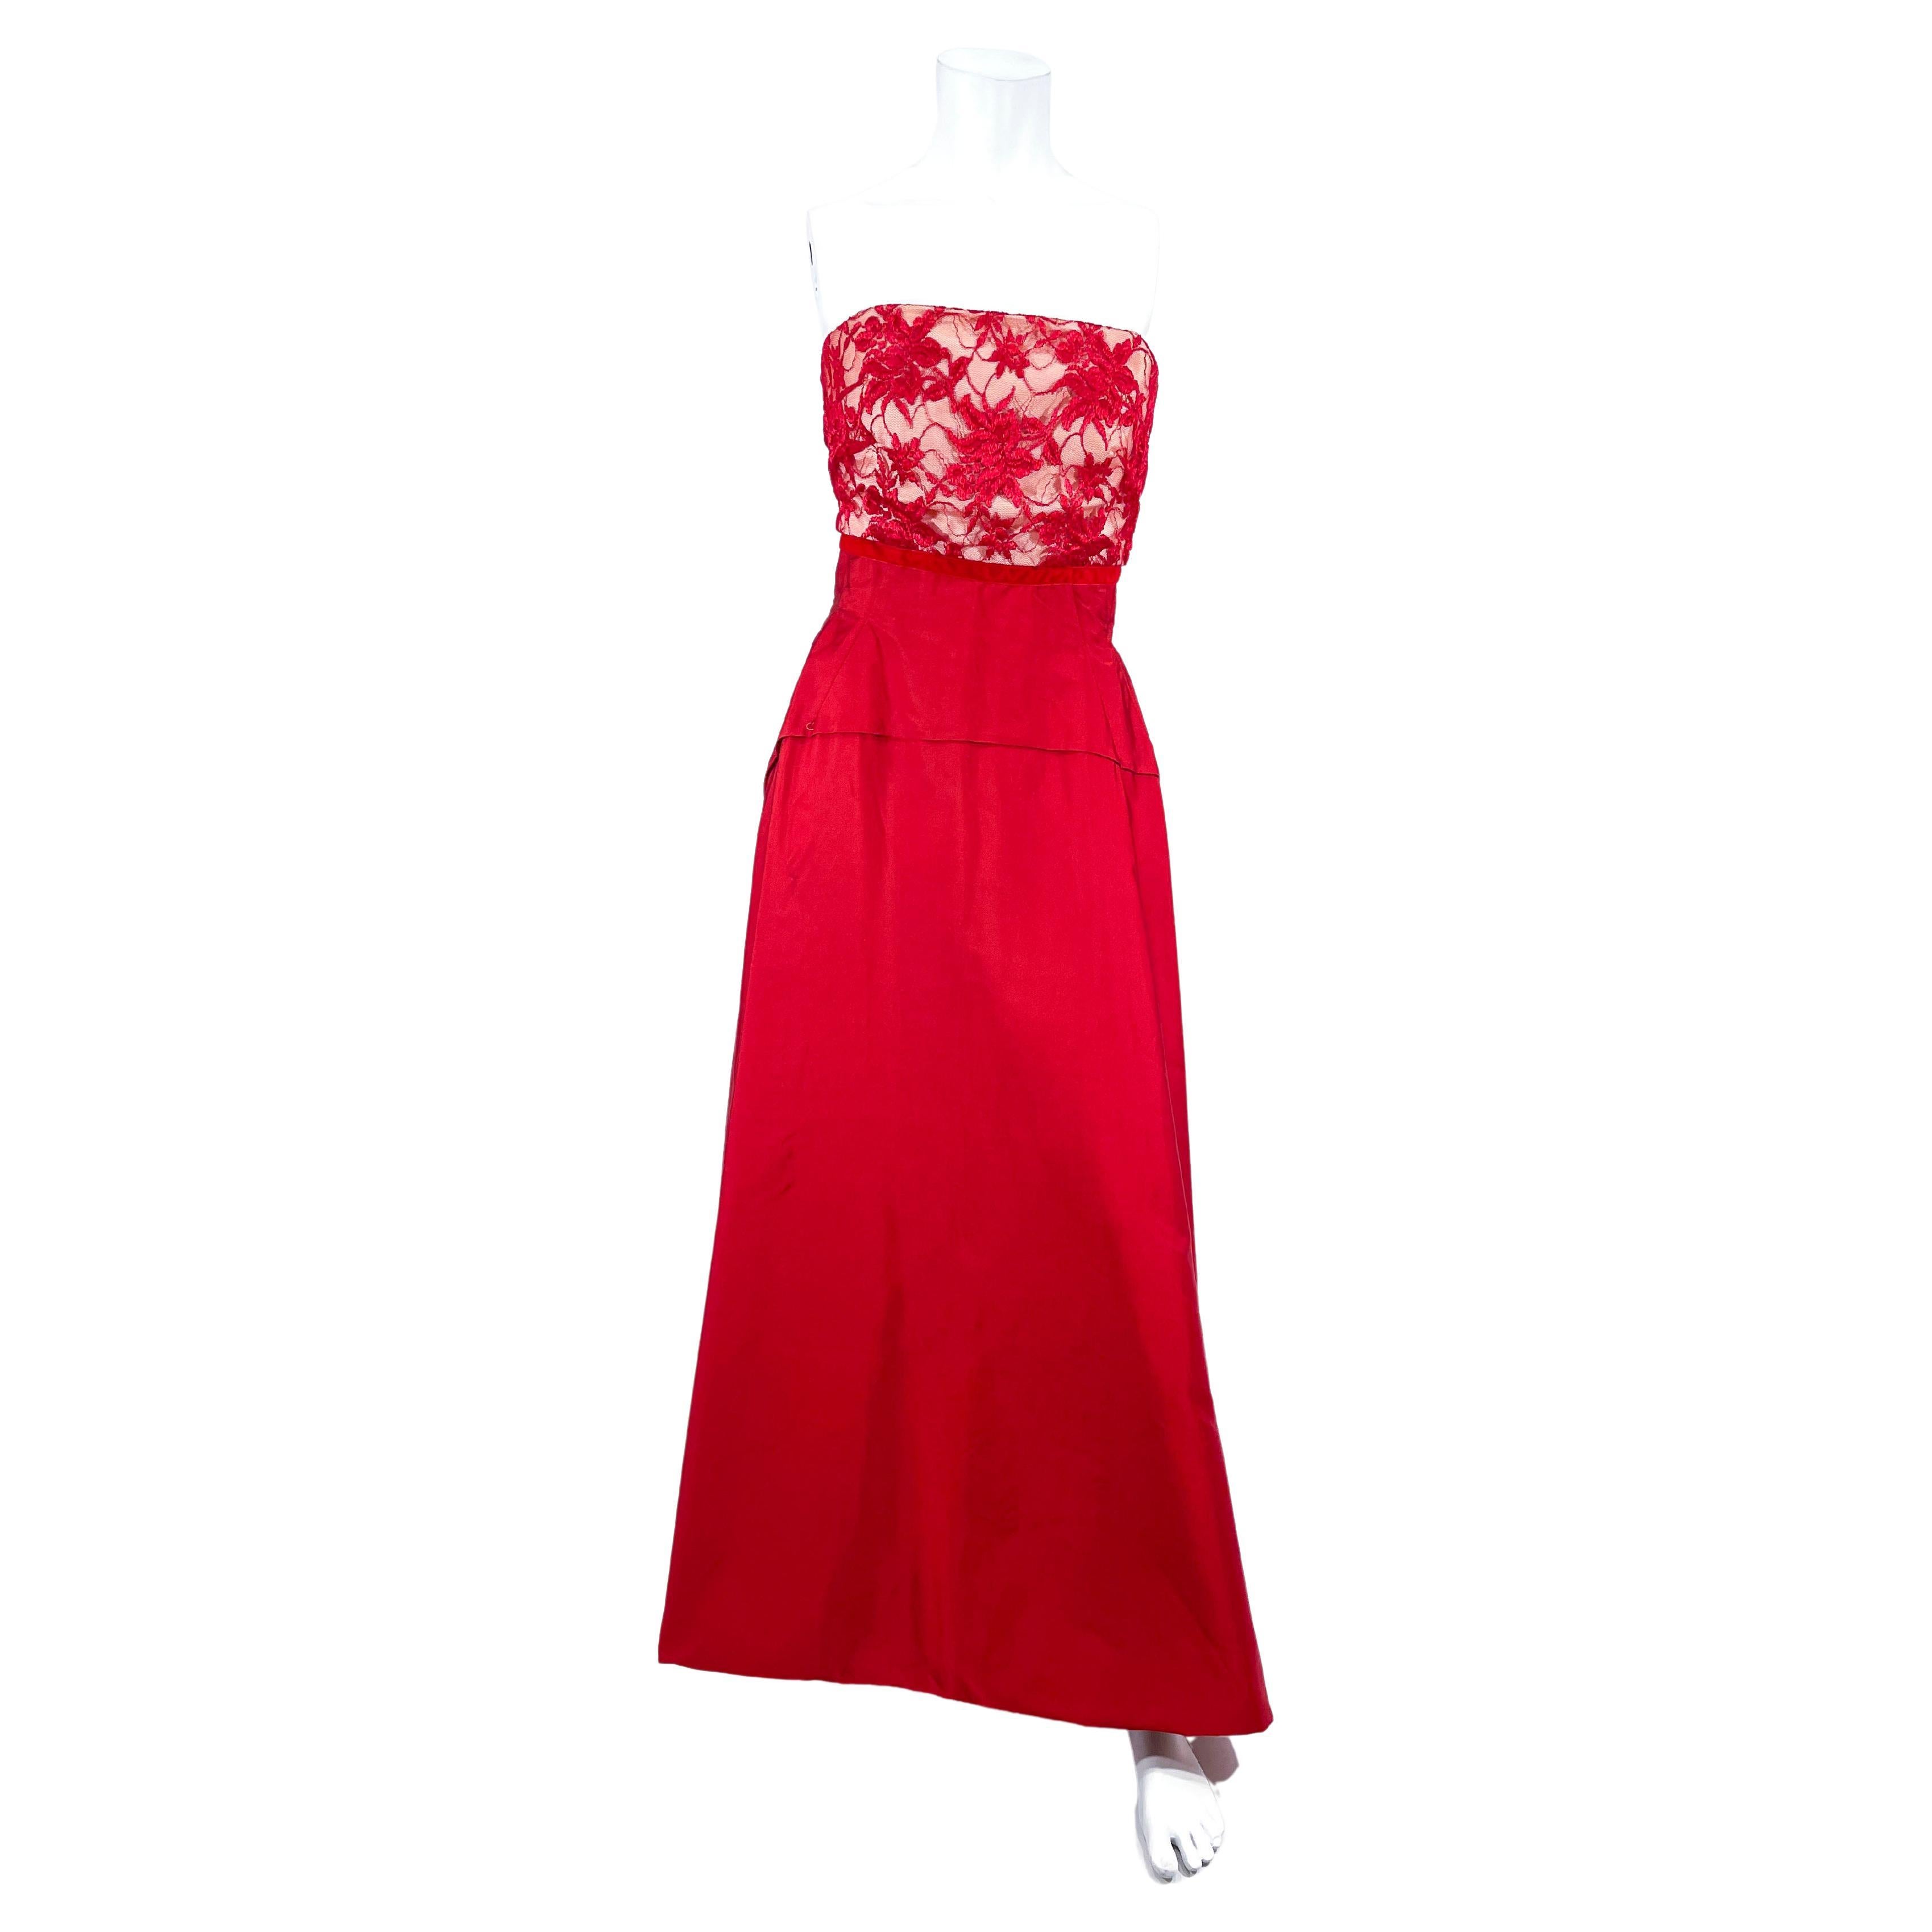 1960s Helena Barbieri Red Satin and Lace Evening Gown For Sale